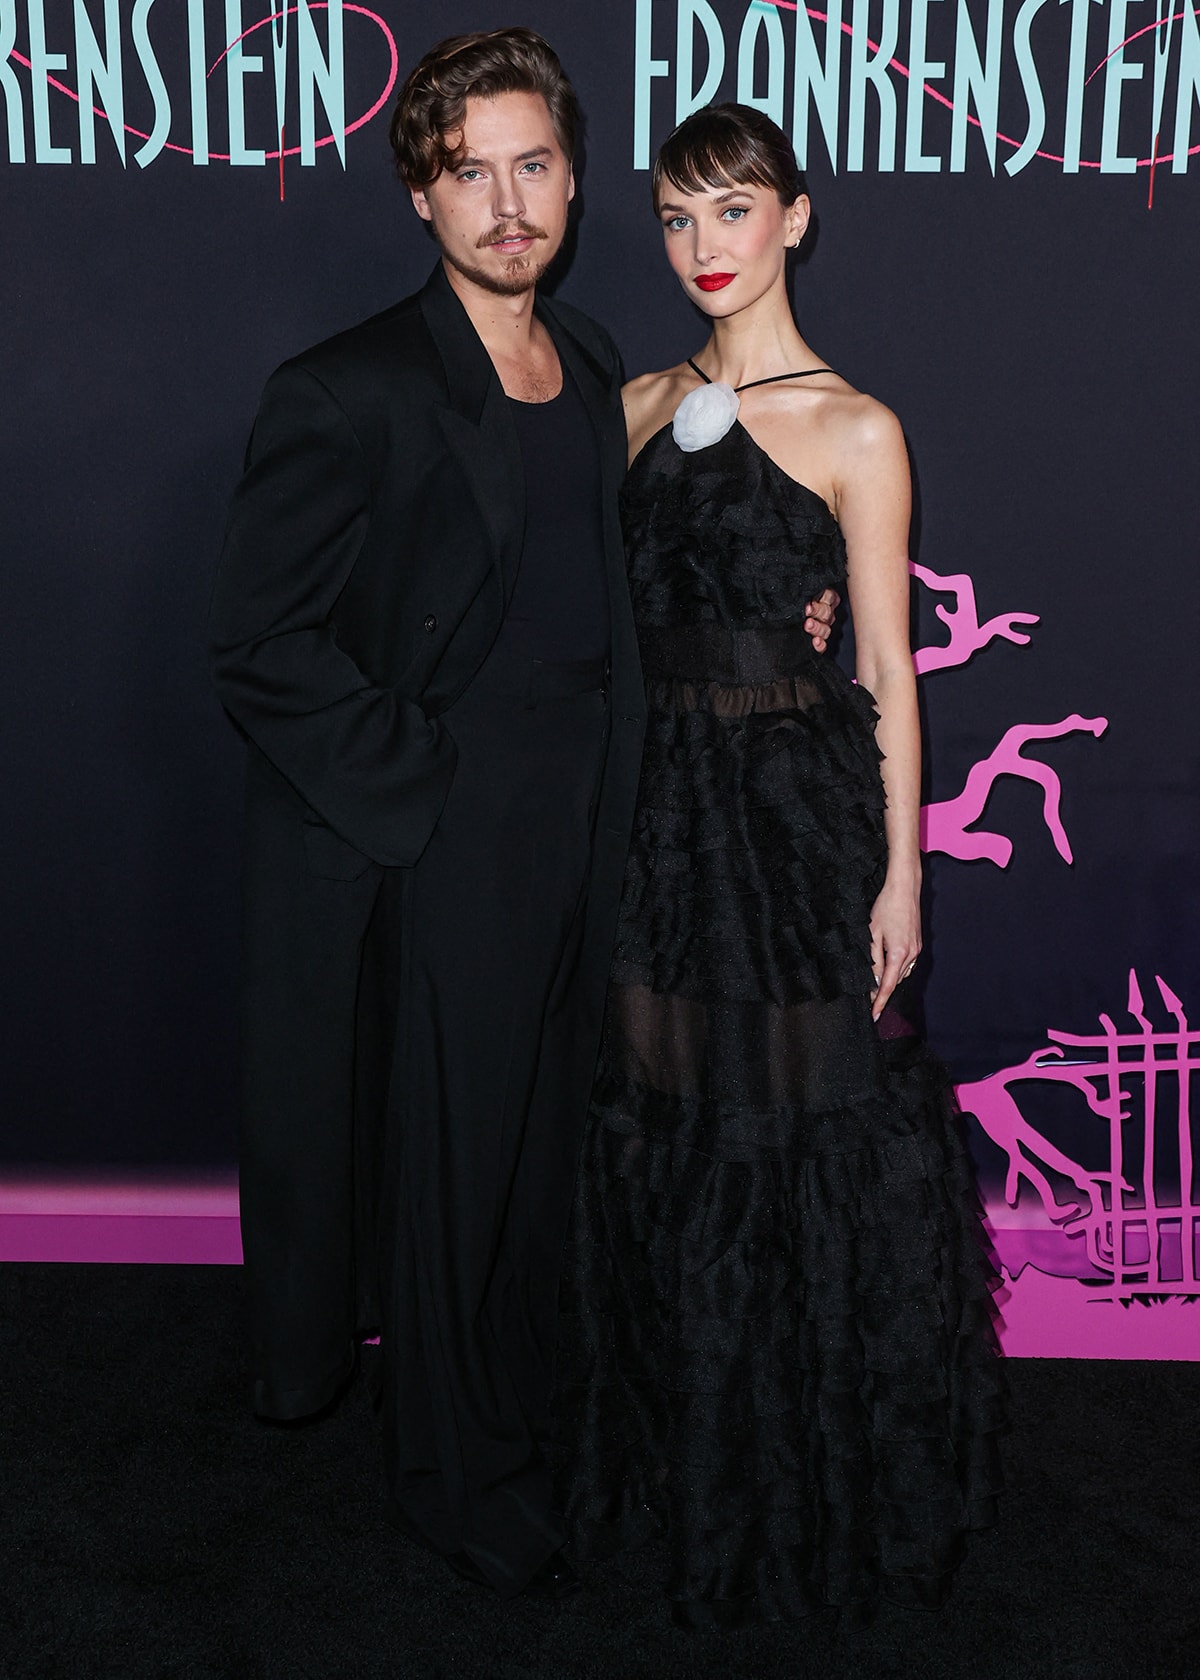 Cole Sprouse, wearing a black Balenciaga ensemble, wraps his arm around his girlfriend's tiny waist as they pose on the red carpet at the Hollywood Athletic Club in Los Angeles for the premiere of Lisa Frankenstein on February 5, 2024